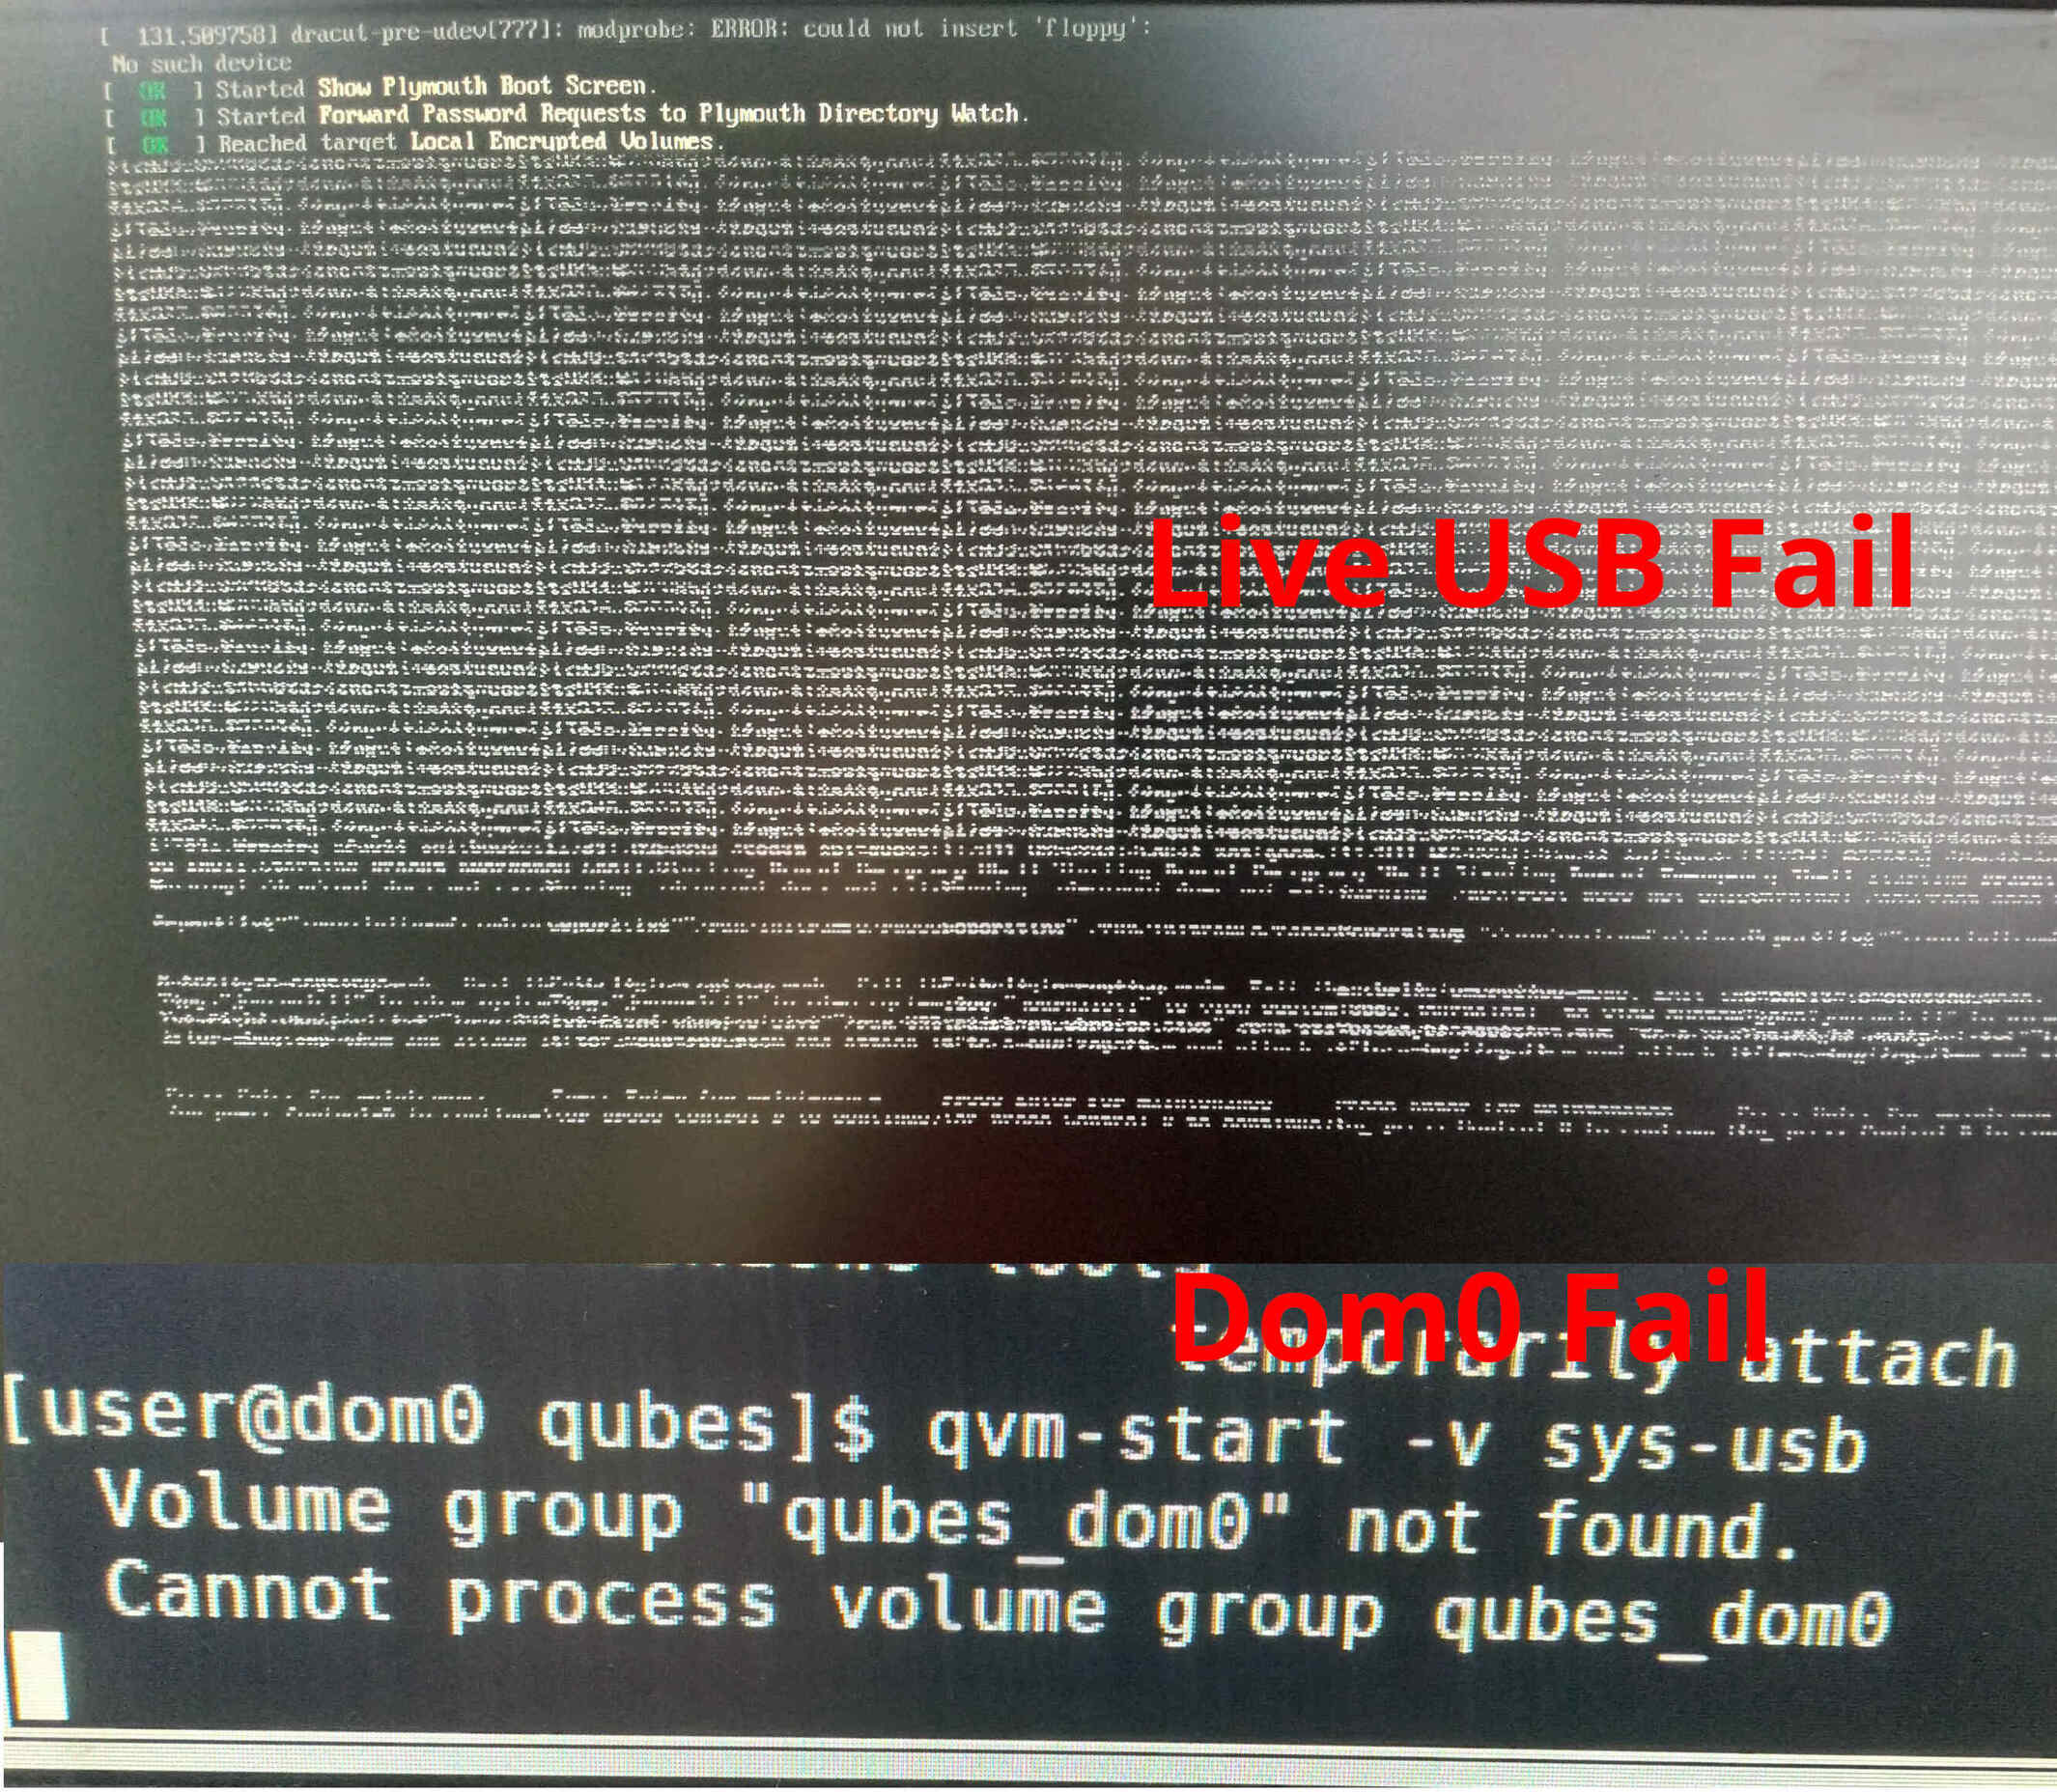 ASUS BIOS update breaks my Qubes OS - Hardware Issues - OS Forum